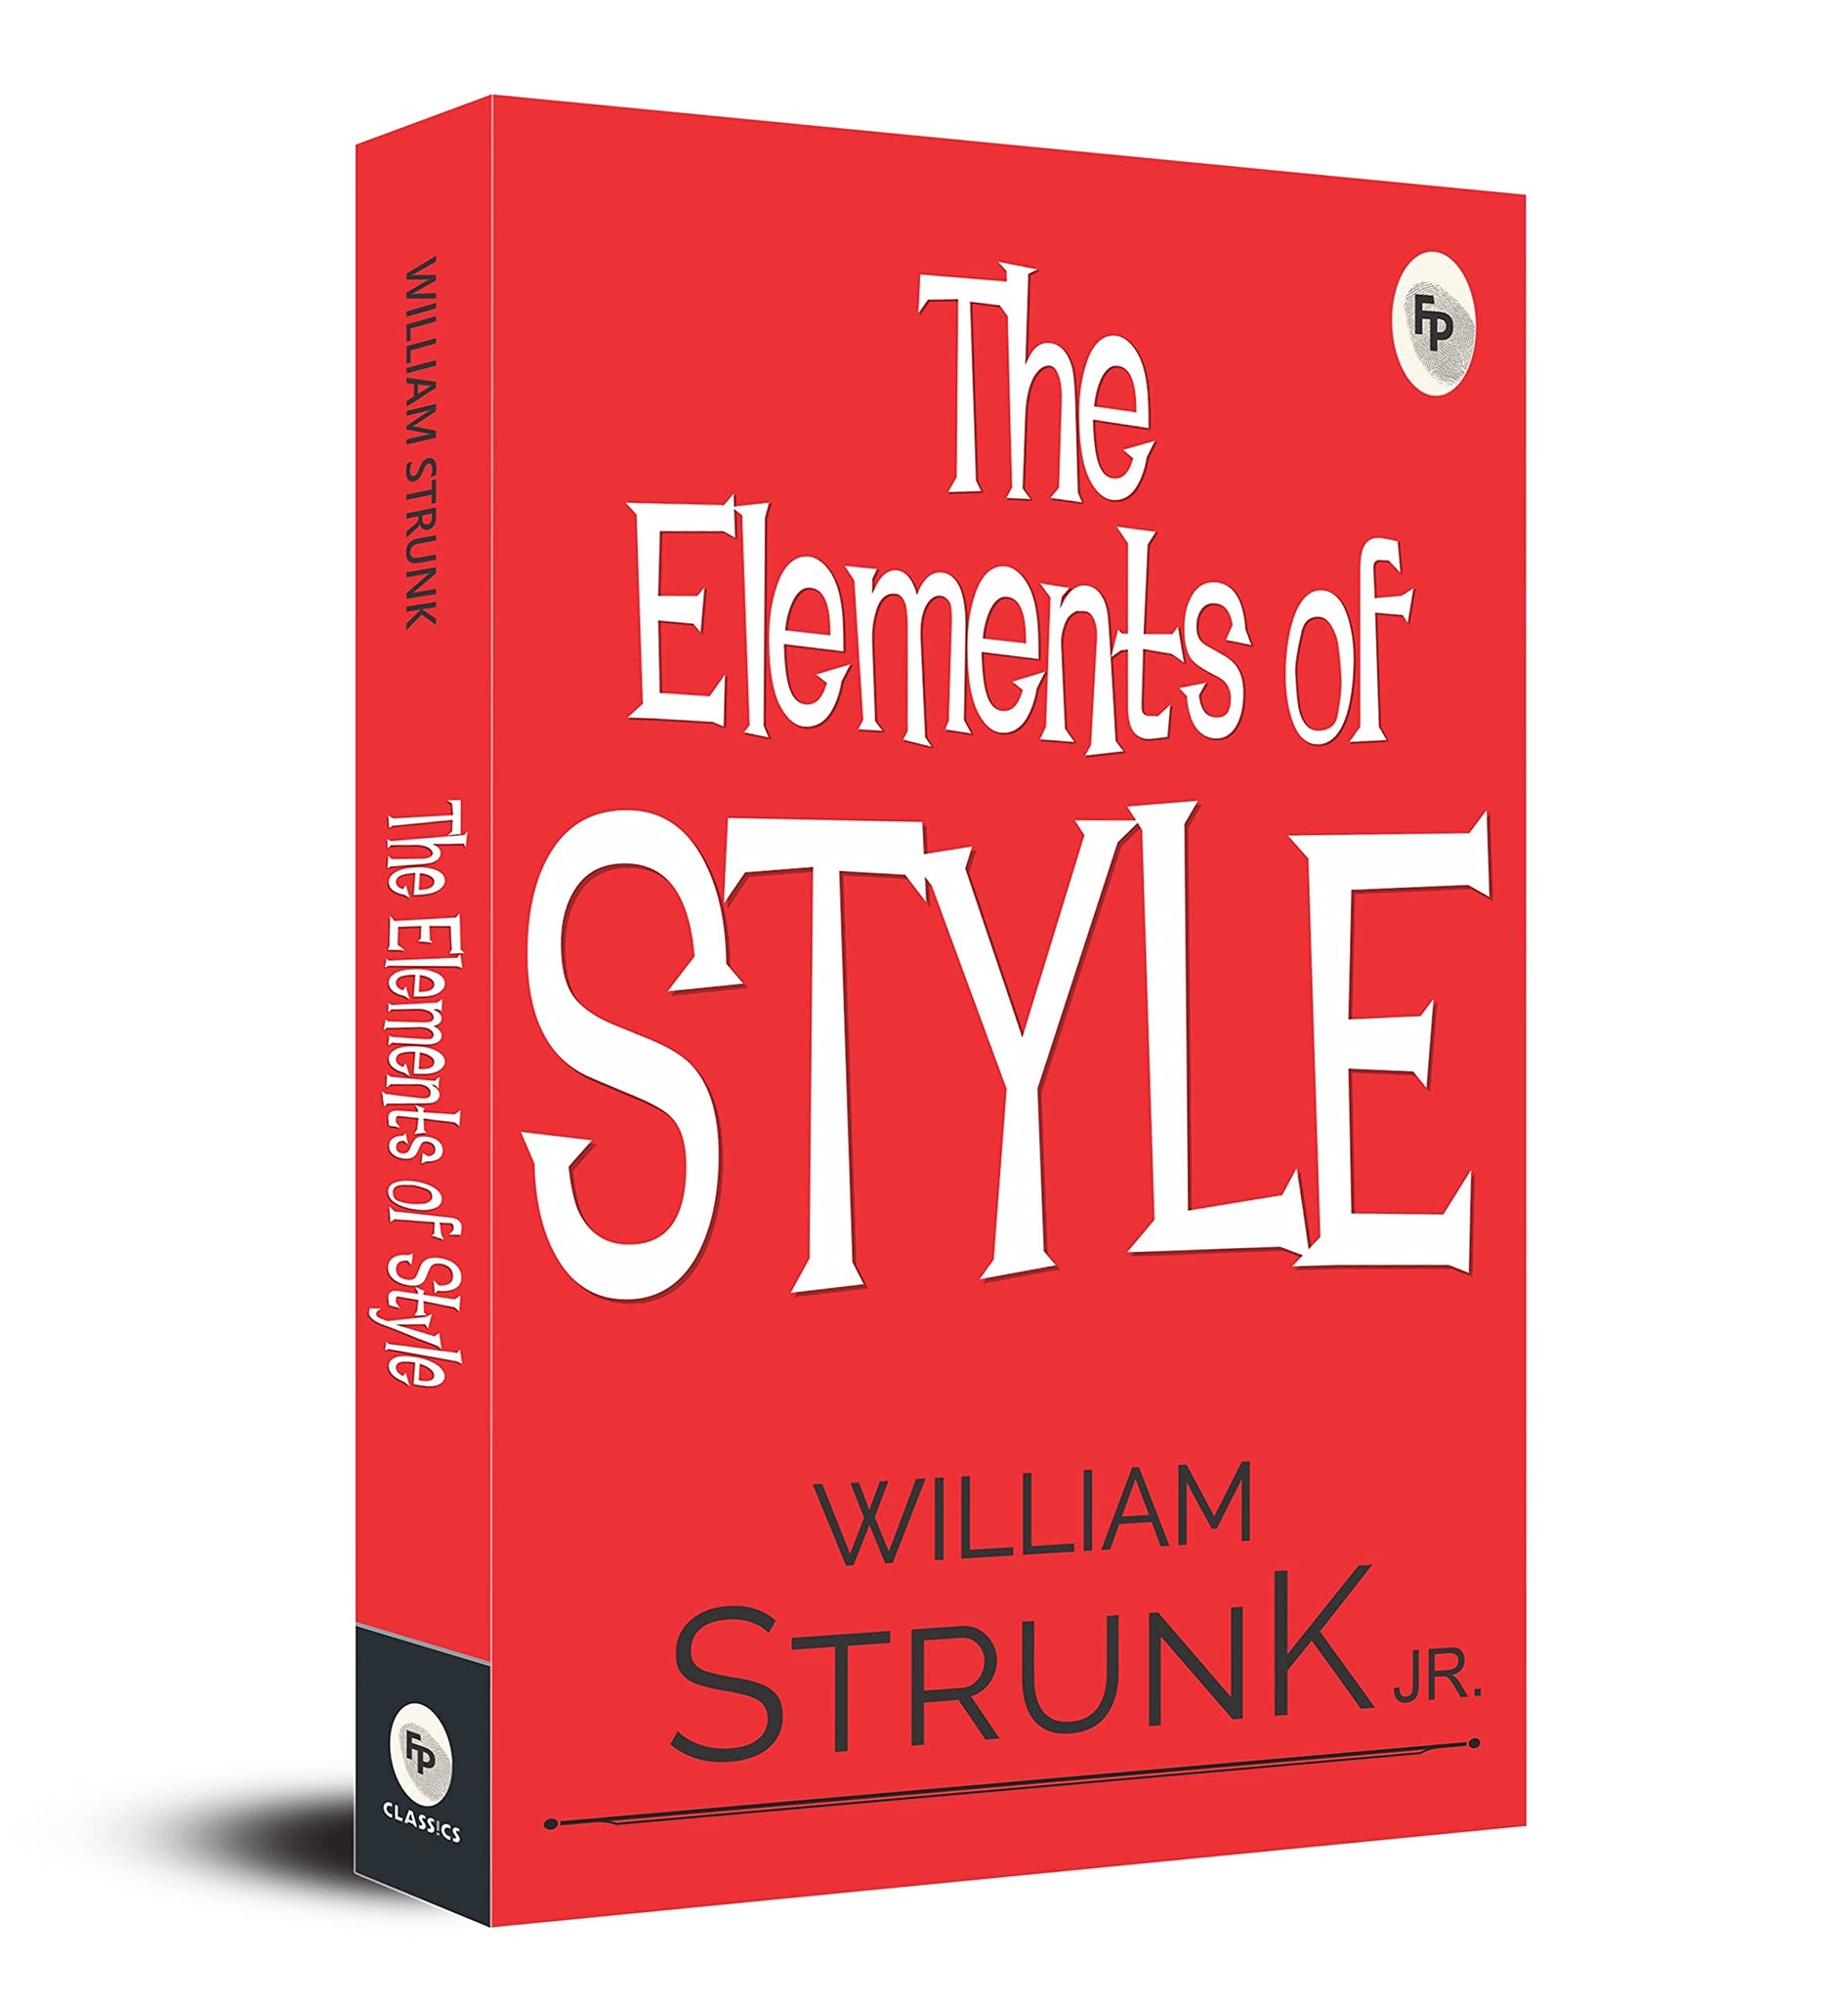 The Elements of Style - Wikipedia